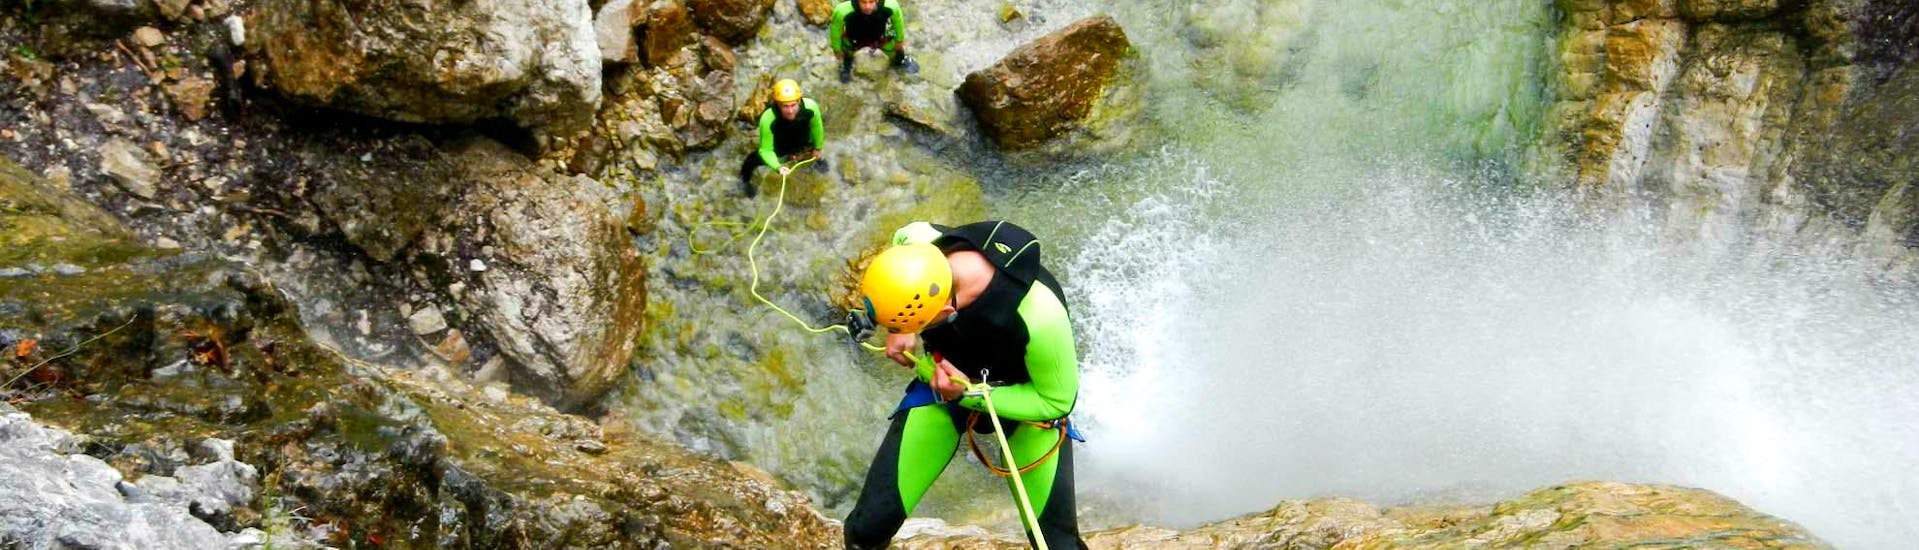 Canyoning expert à Bovec - Predelica.